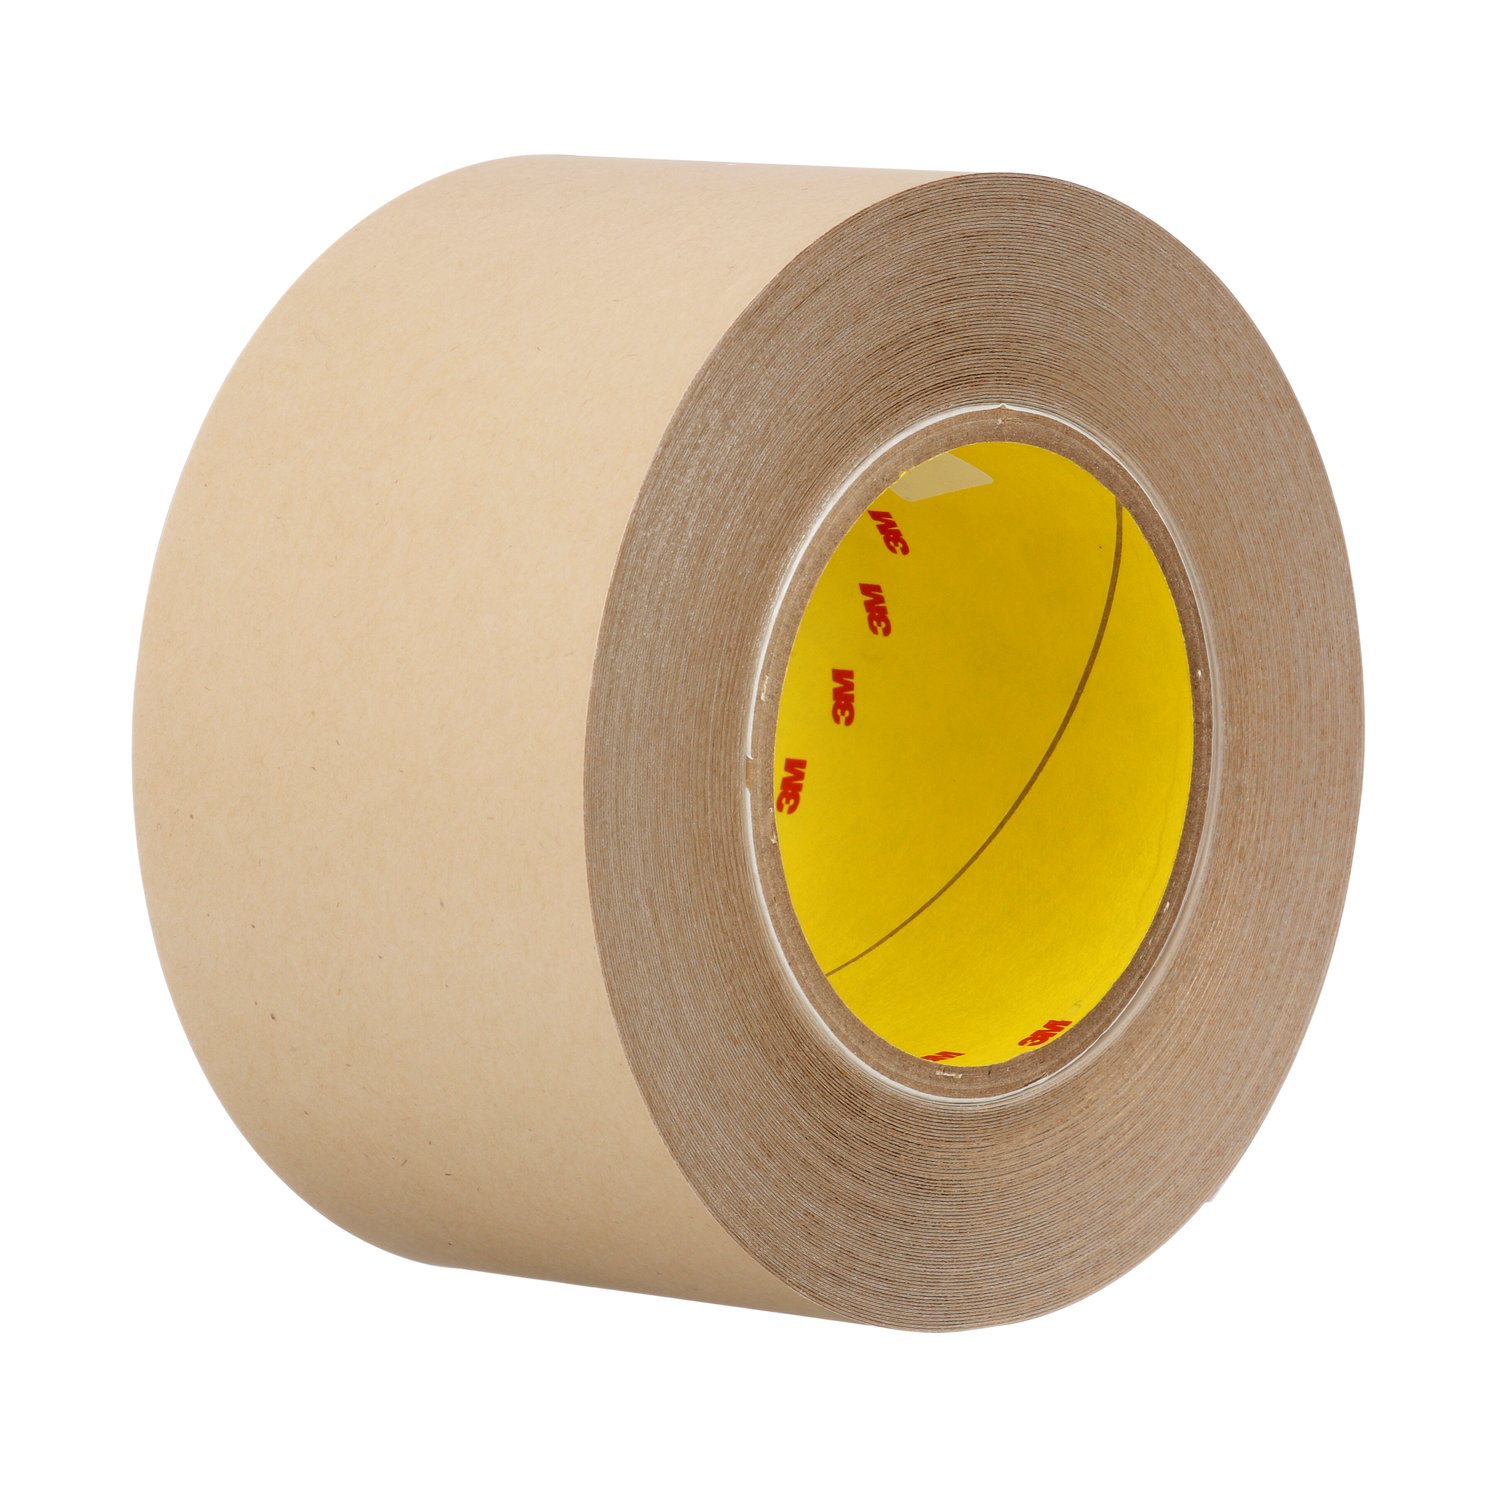 7100025184 - 3M Sealing Tape 8777, Tan, 3 in x 75 ft, 12 rolls per case, Solid Liner